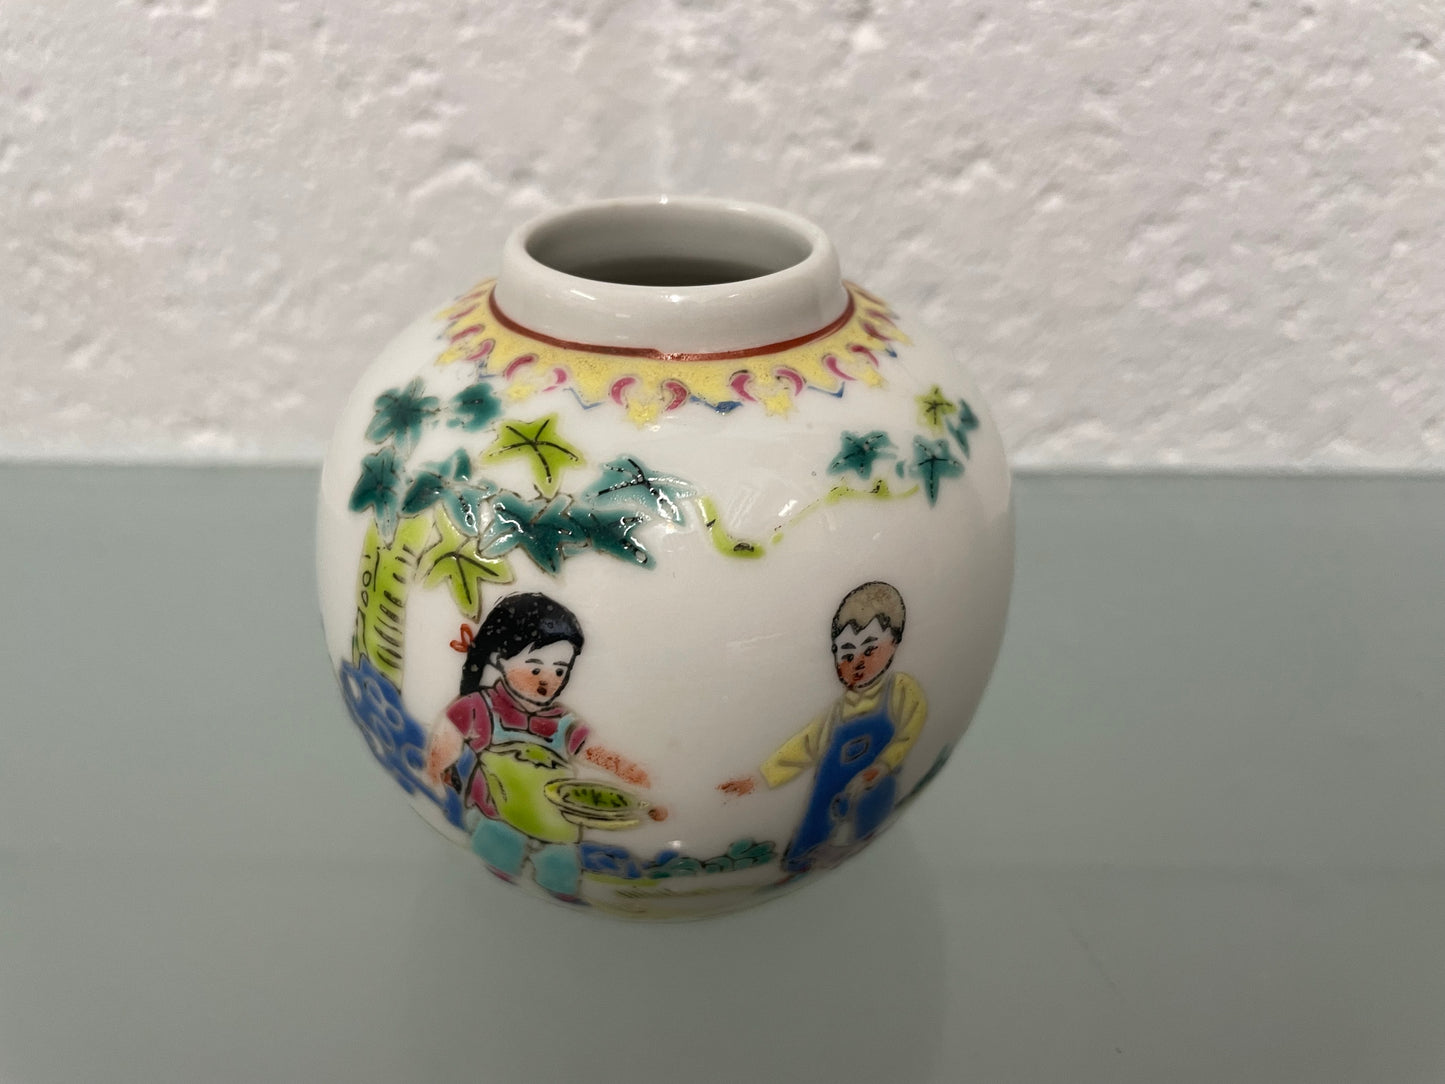 Vintage Miniature Hand Painted Chinese Pot